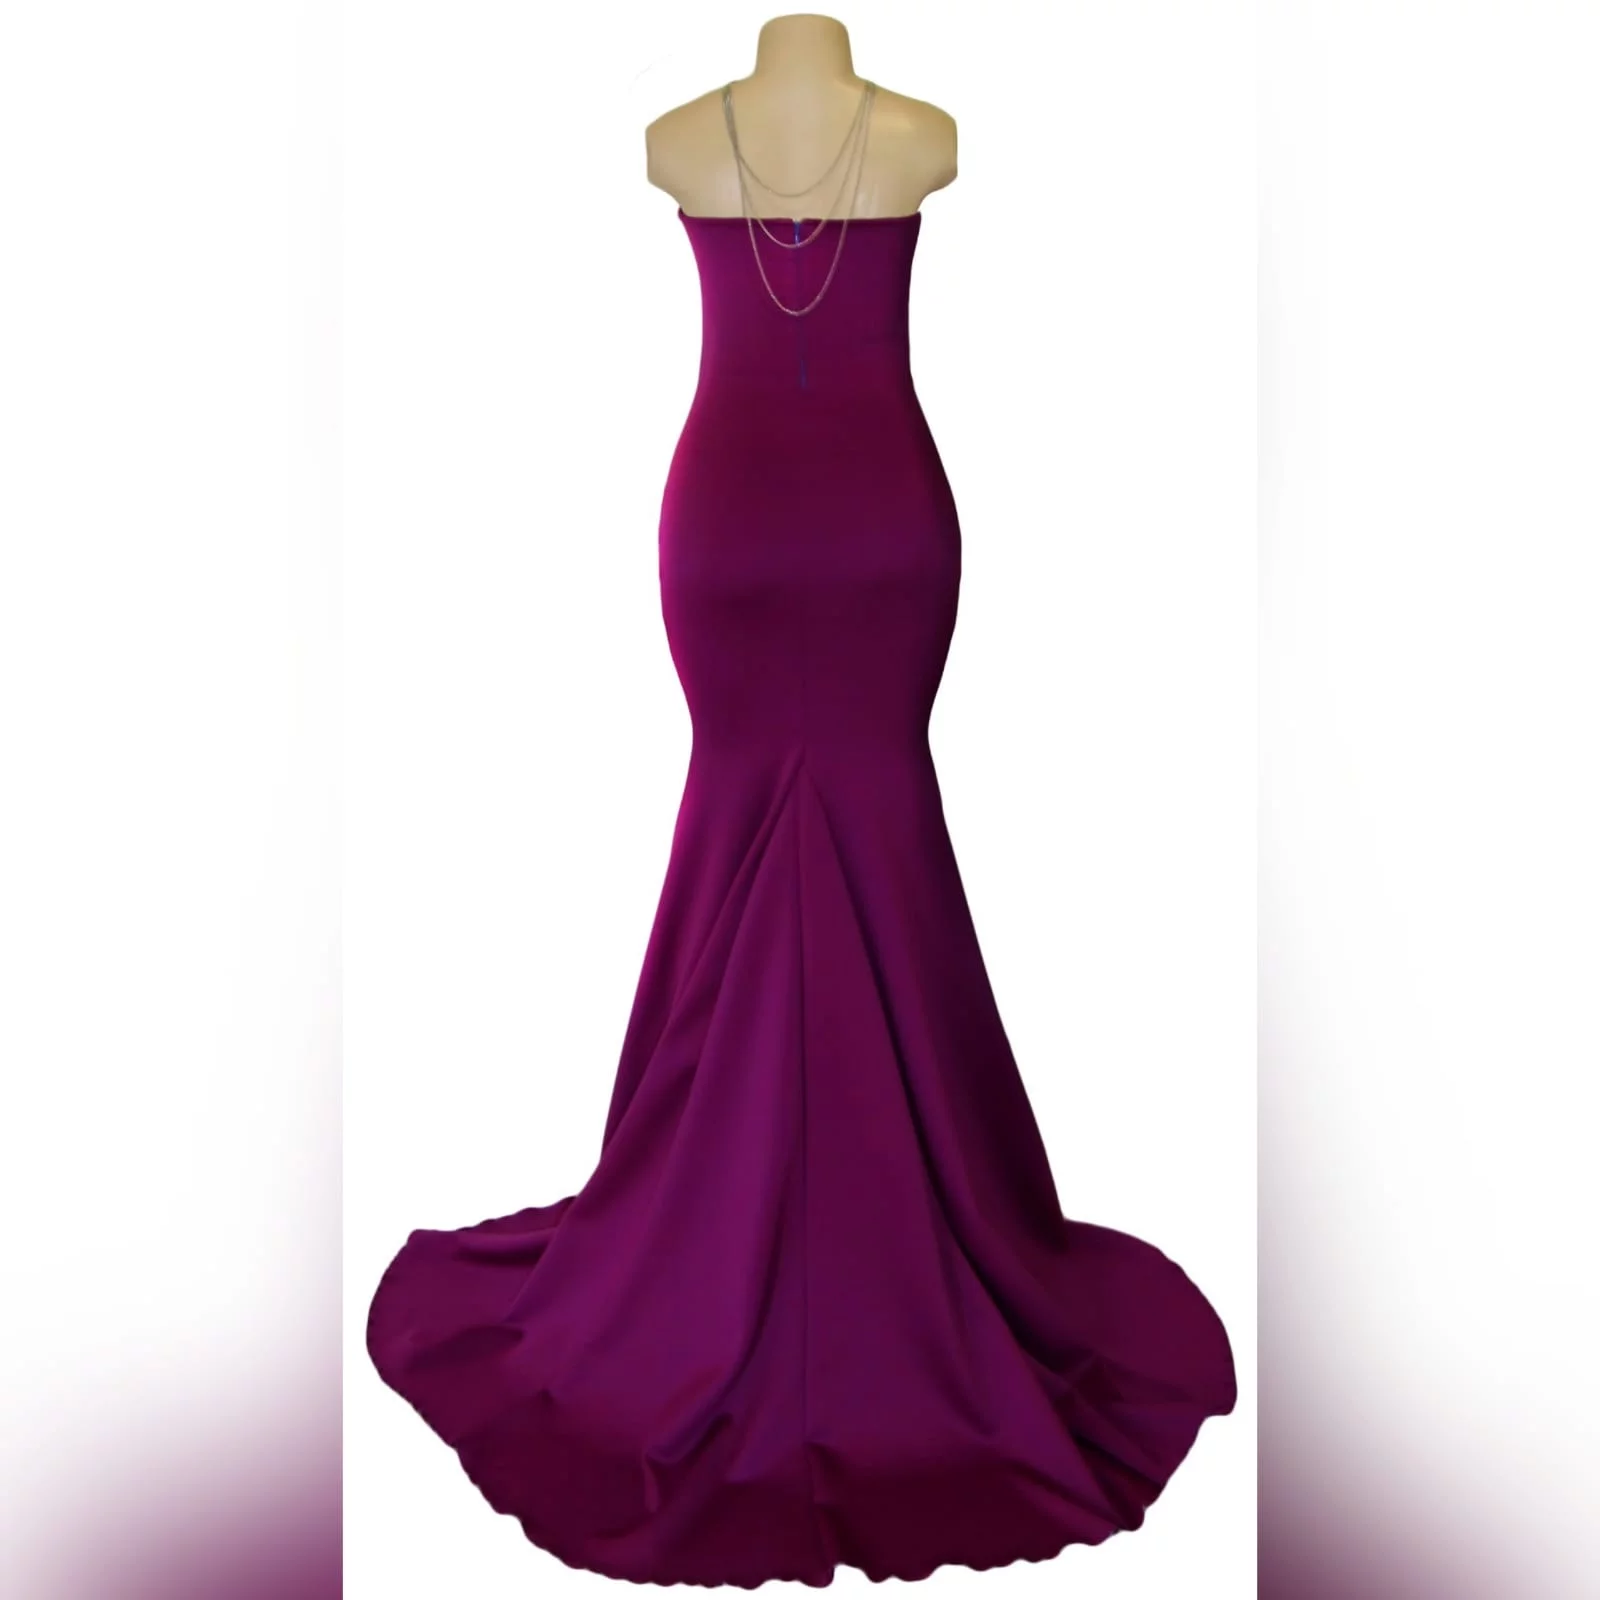 Fuschia soft mermaid tube evening dress 2 fuschia soft mermaid tube evening dress.   with a sweetheart neckline, straight back and a train. Excludes accessory.